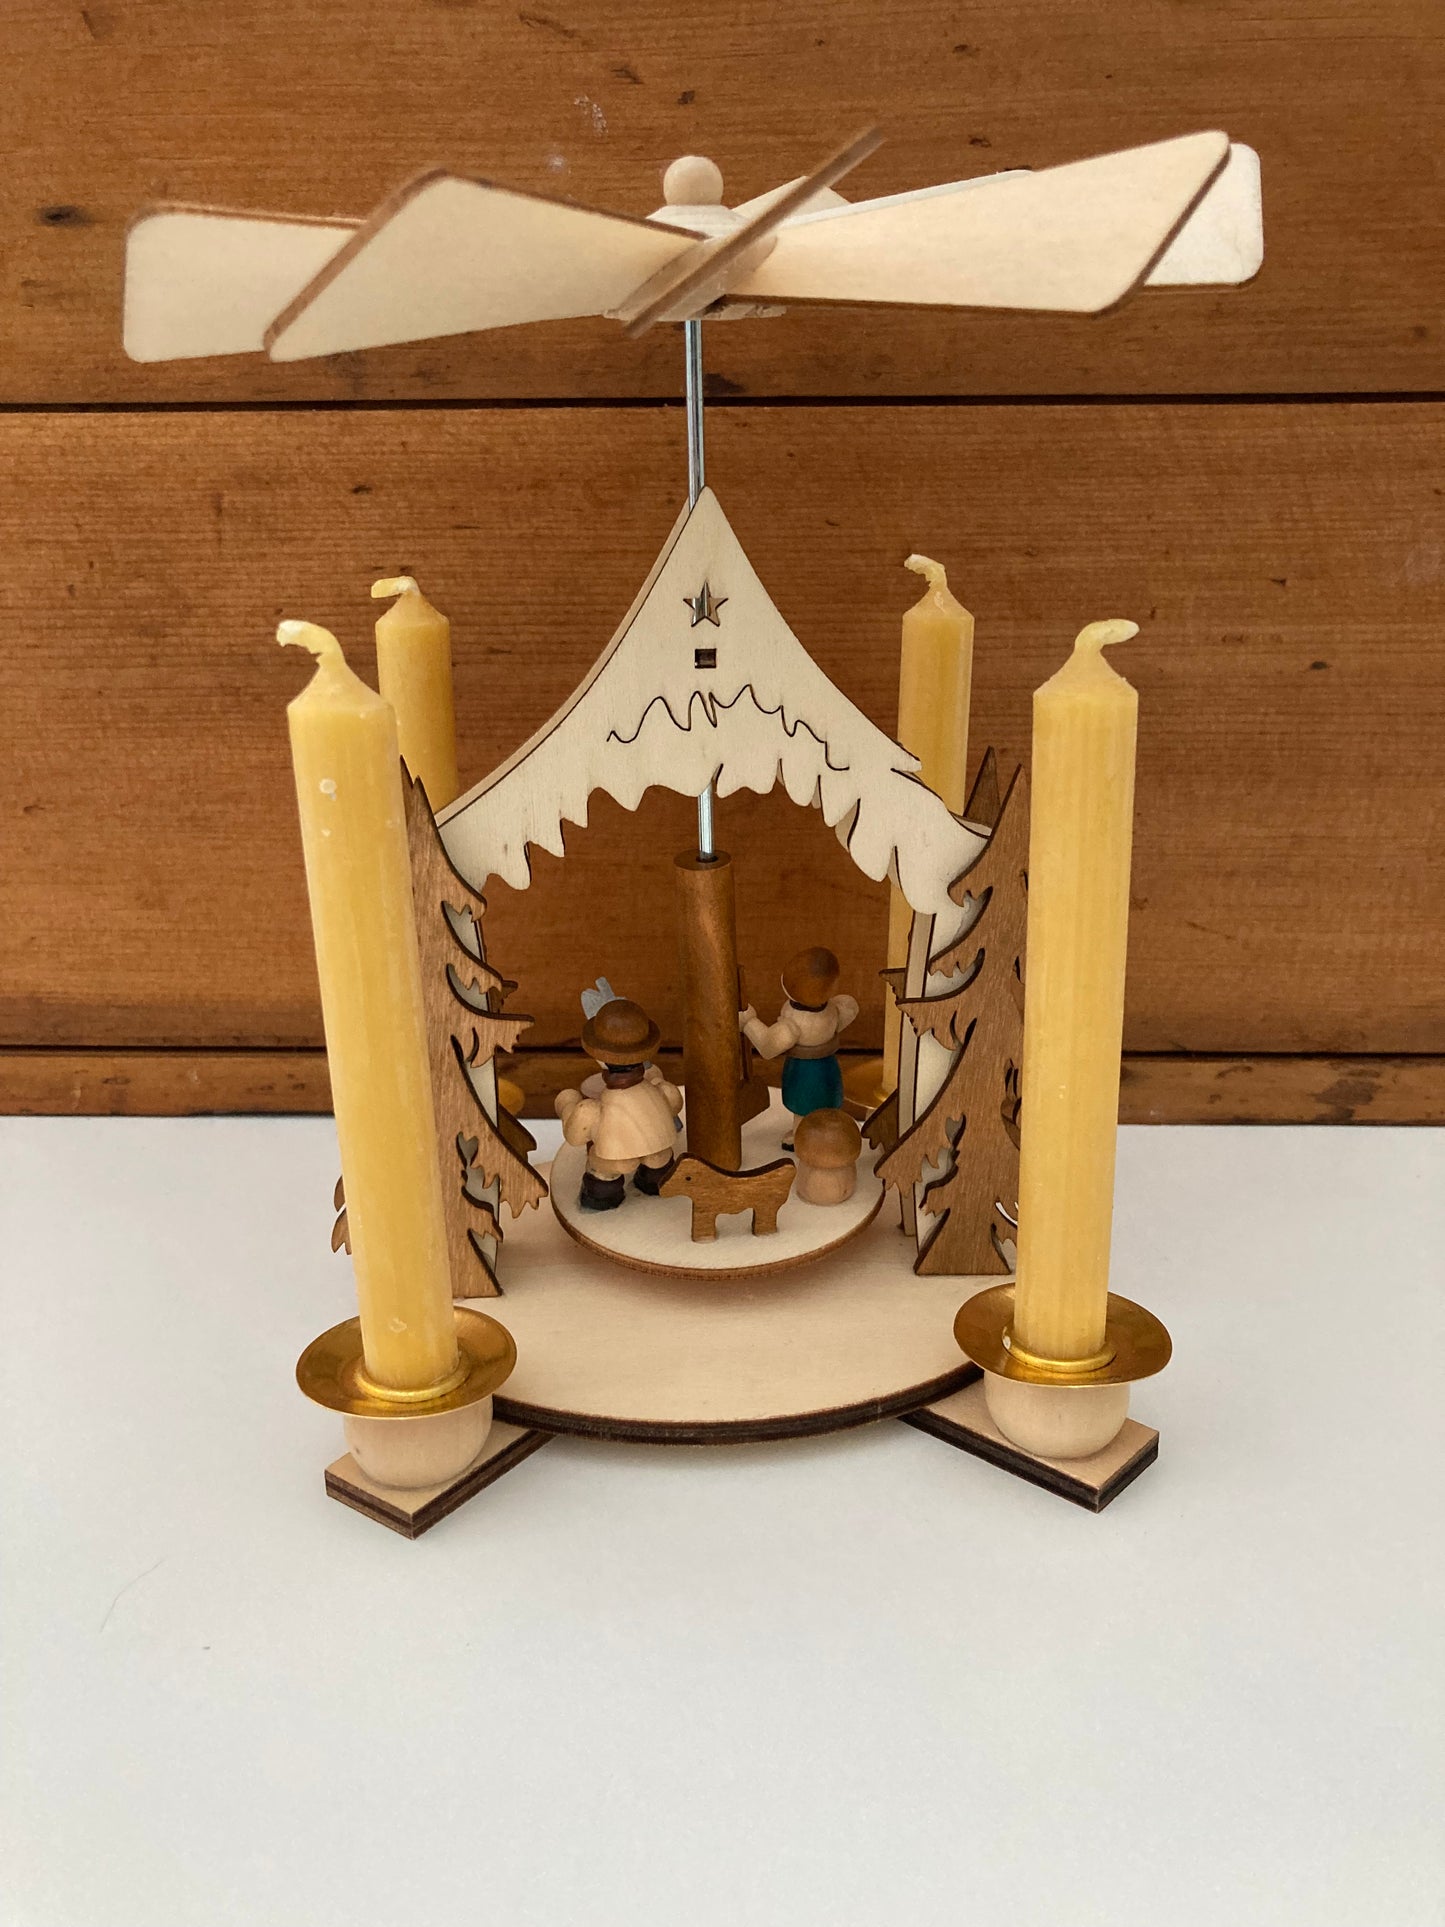 Beeswax Candle Wooden Carousel - WOODCUTTER FAMILY, with 4 Beeswax Candles!